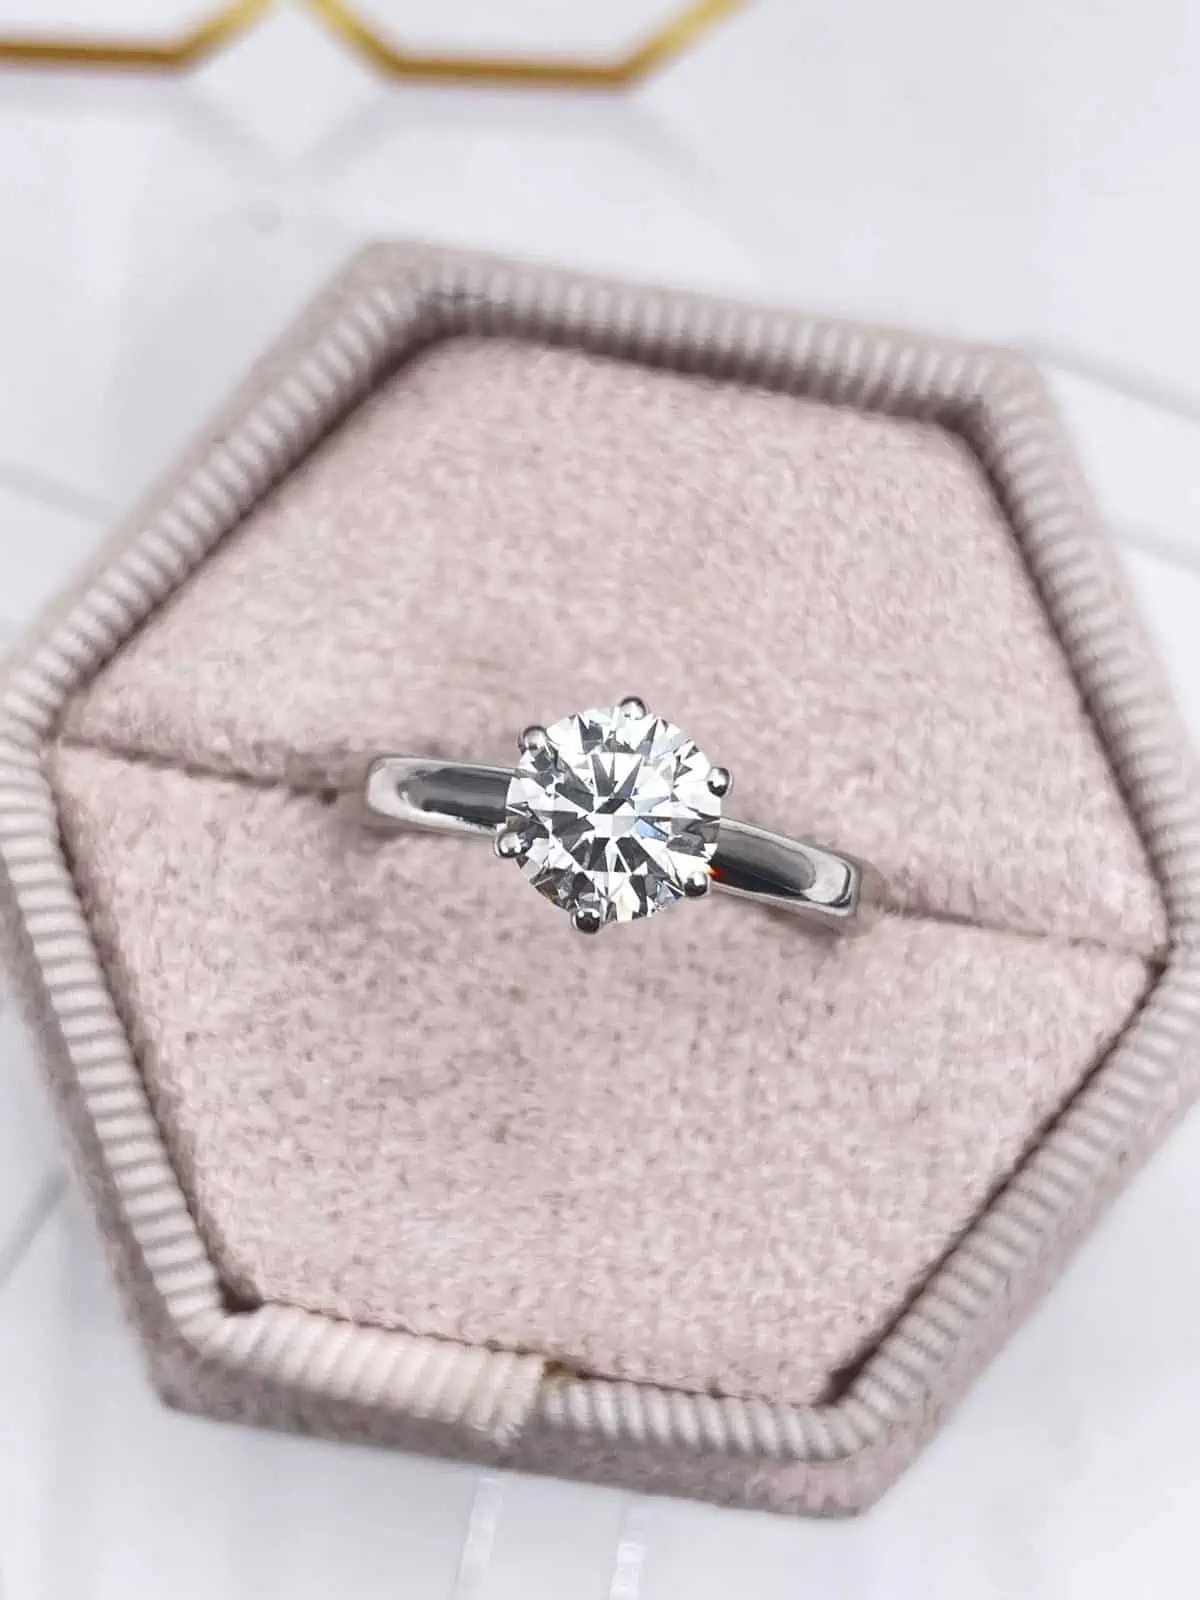 six prong engagement ring